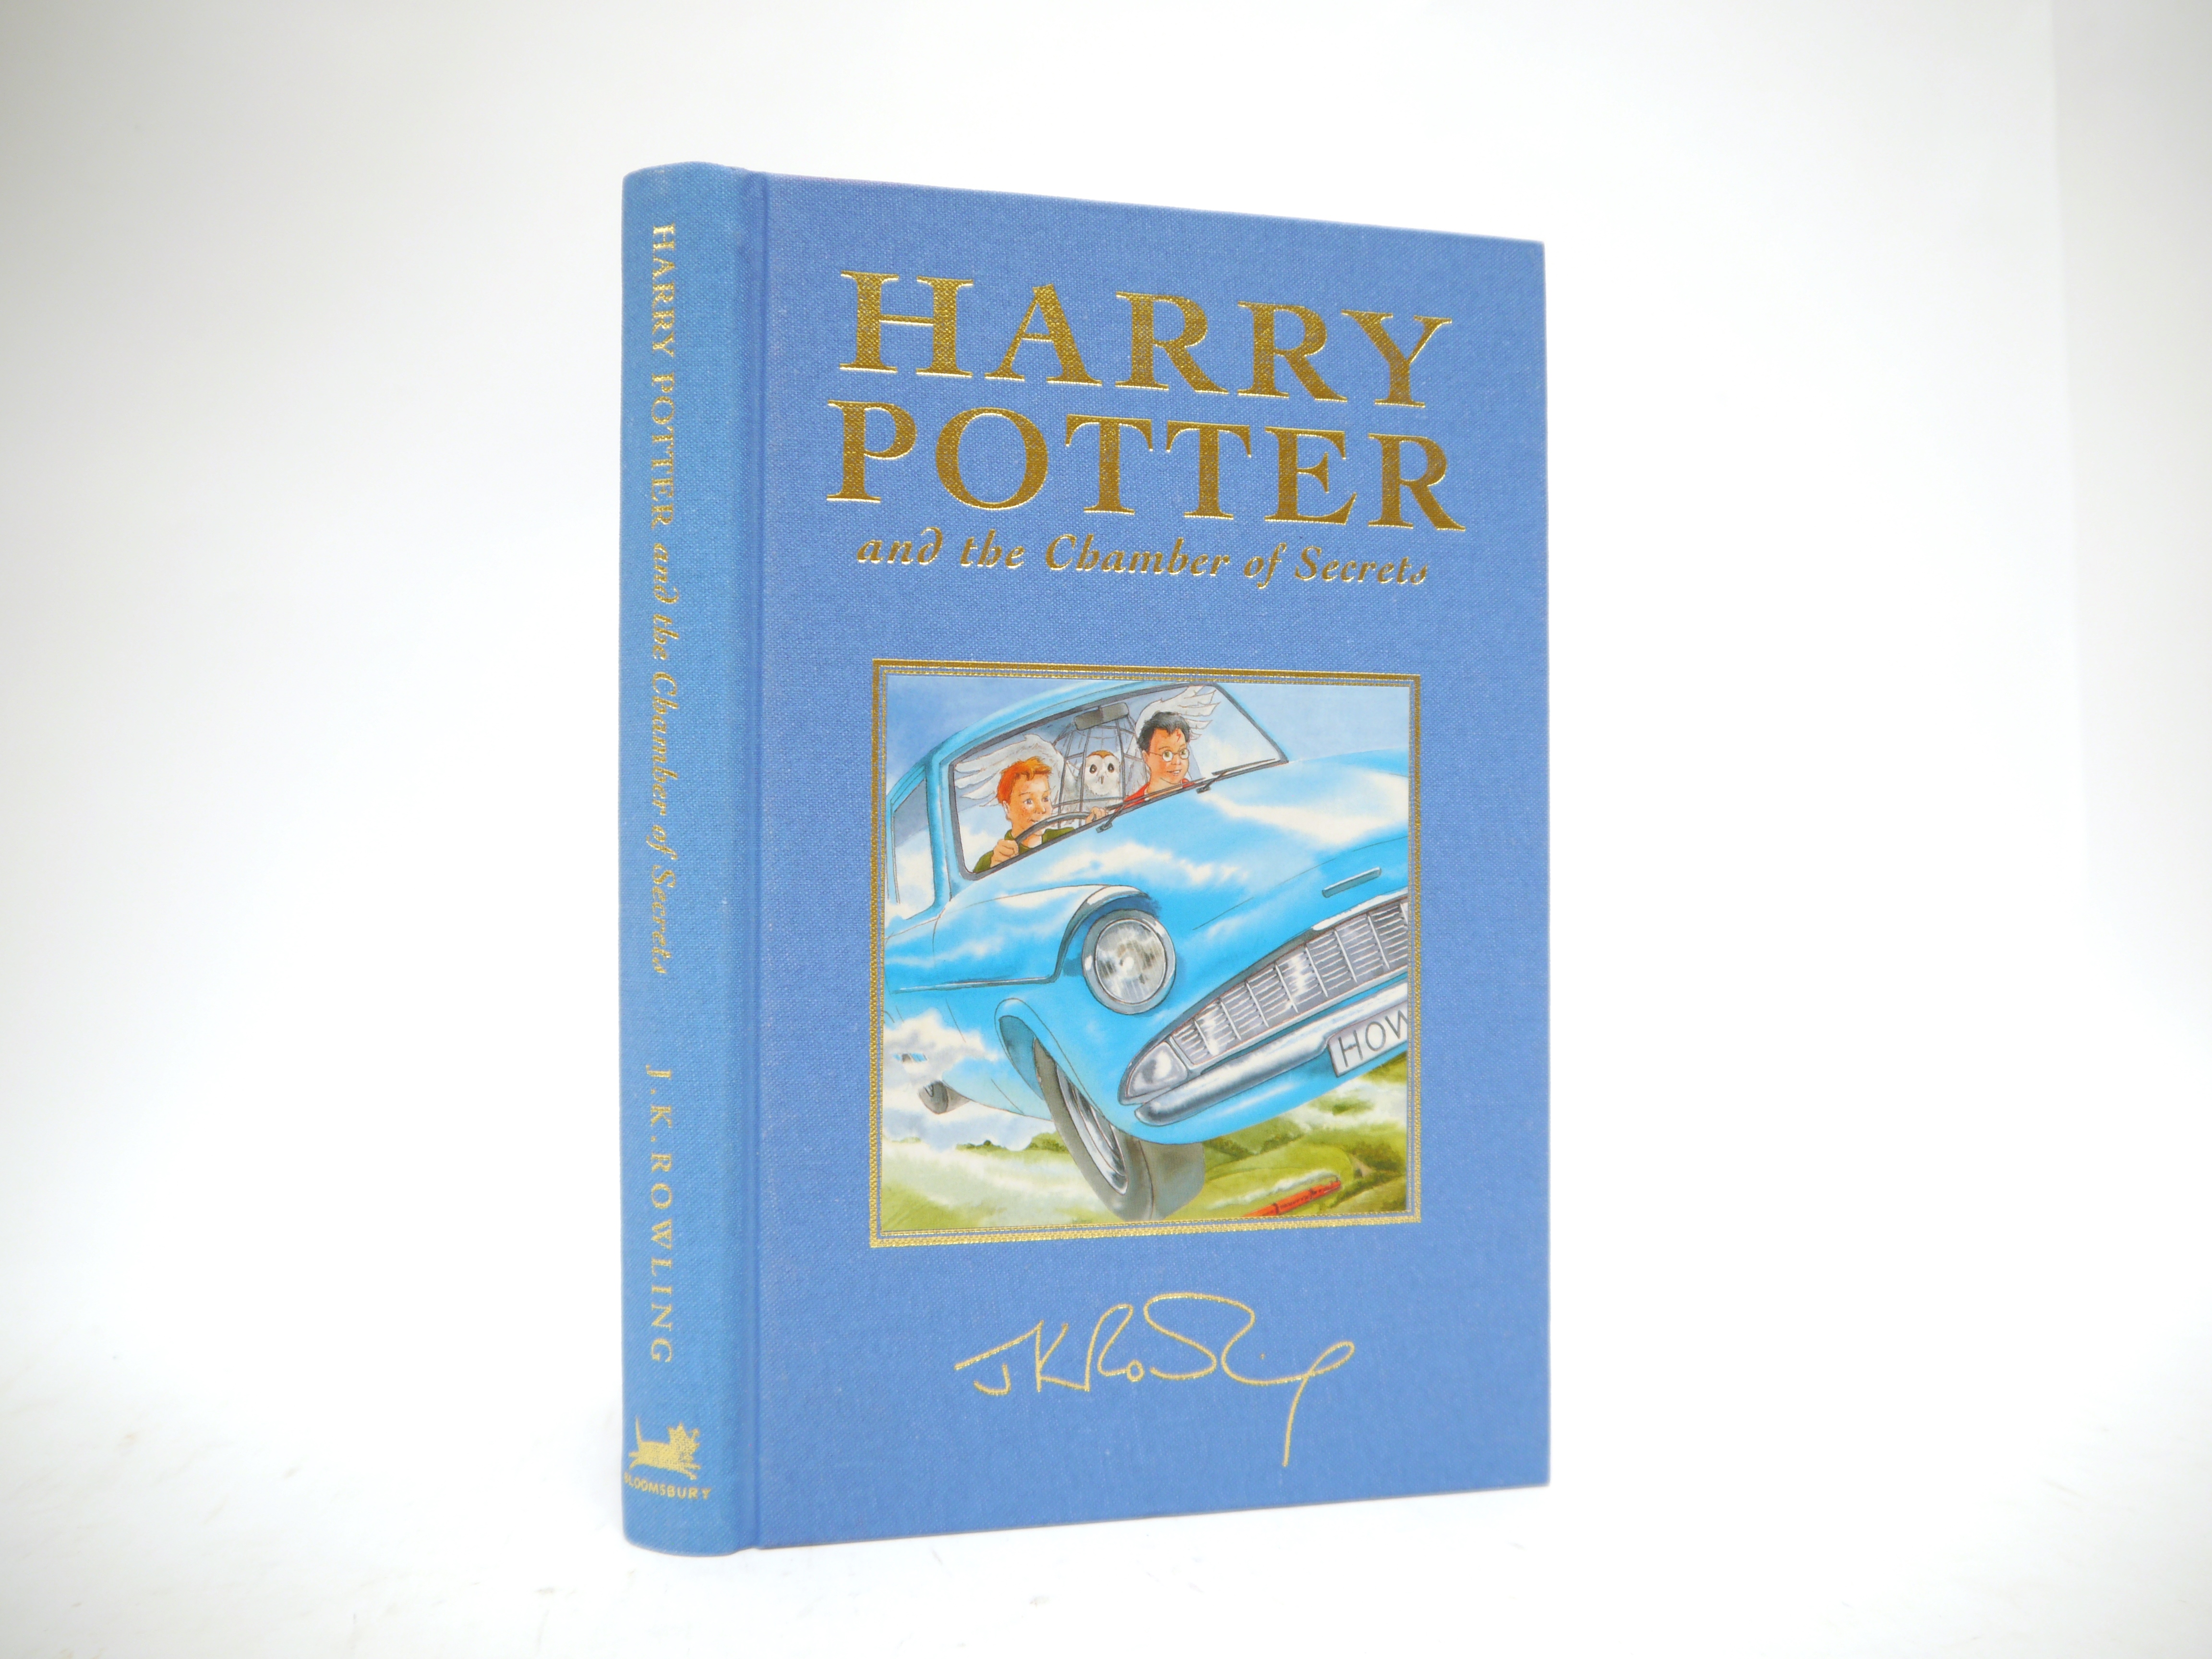 J.K. Rowling: 'Harry Potter and the Chamber of Secrets', London, Bloomsbury, 1999, 1st deluxe